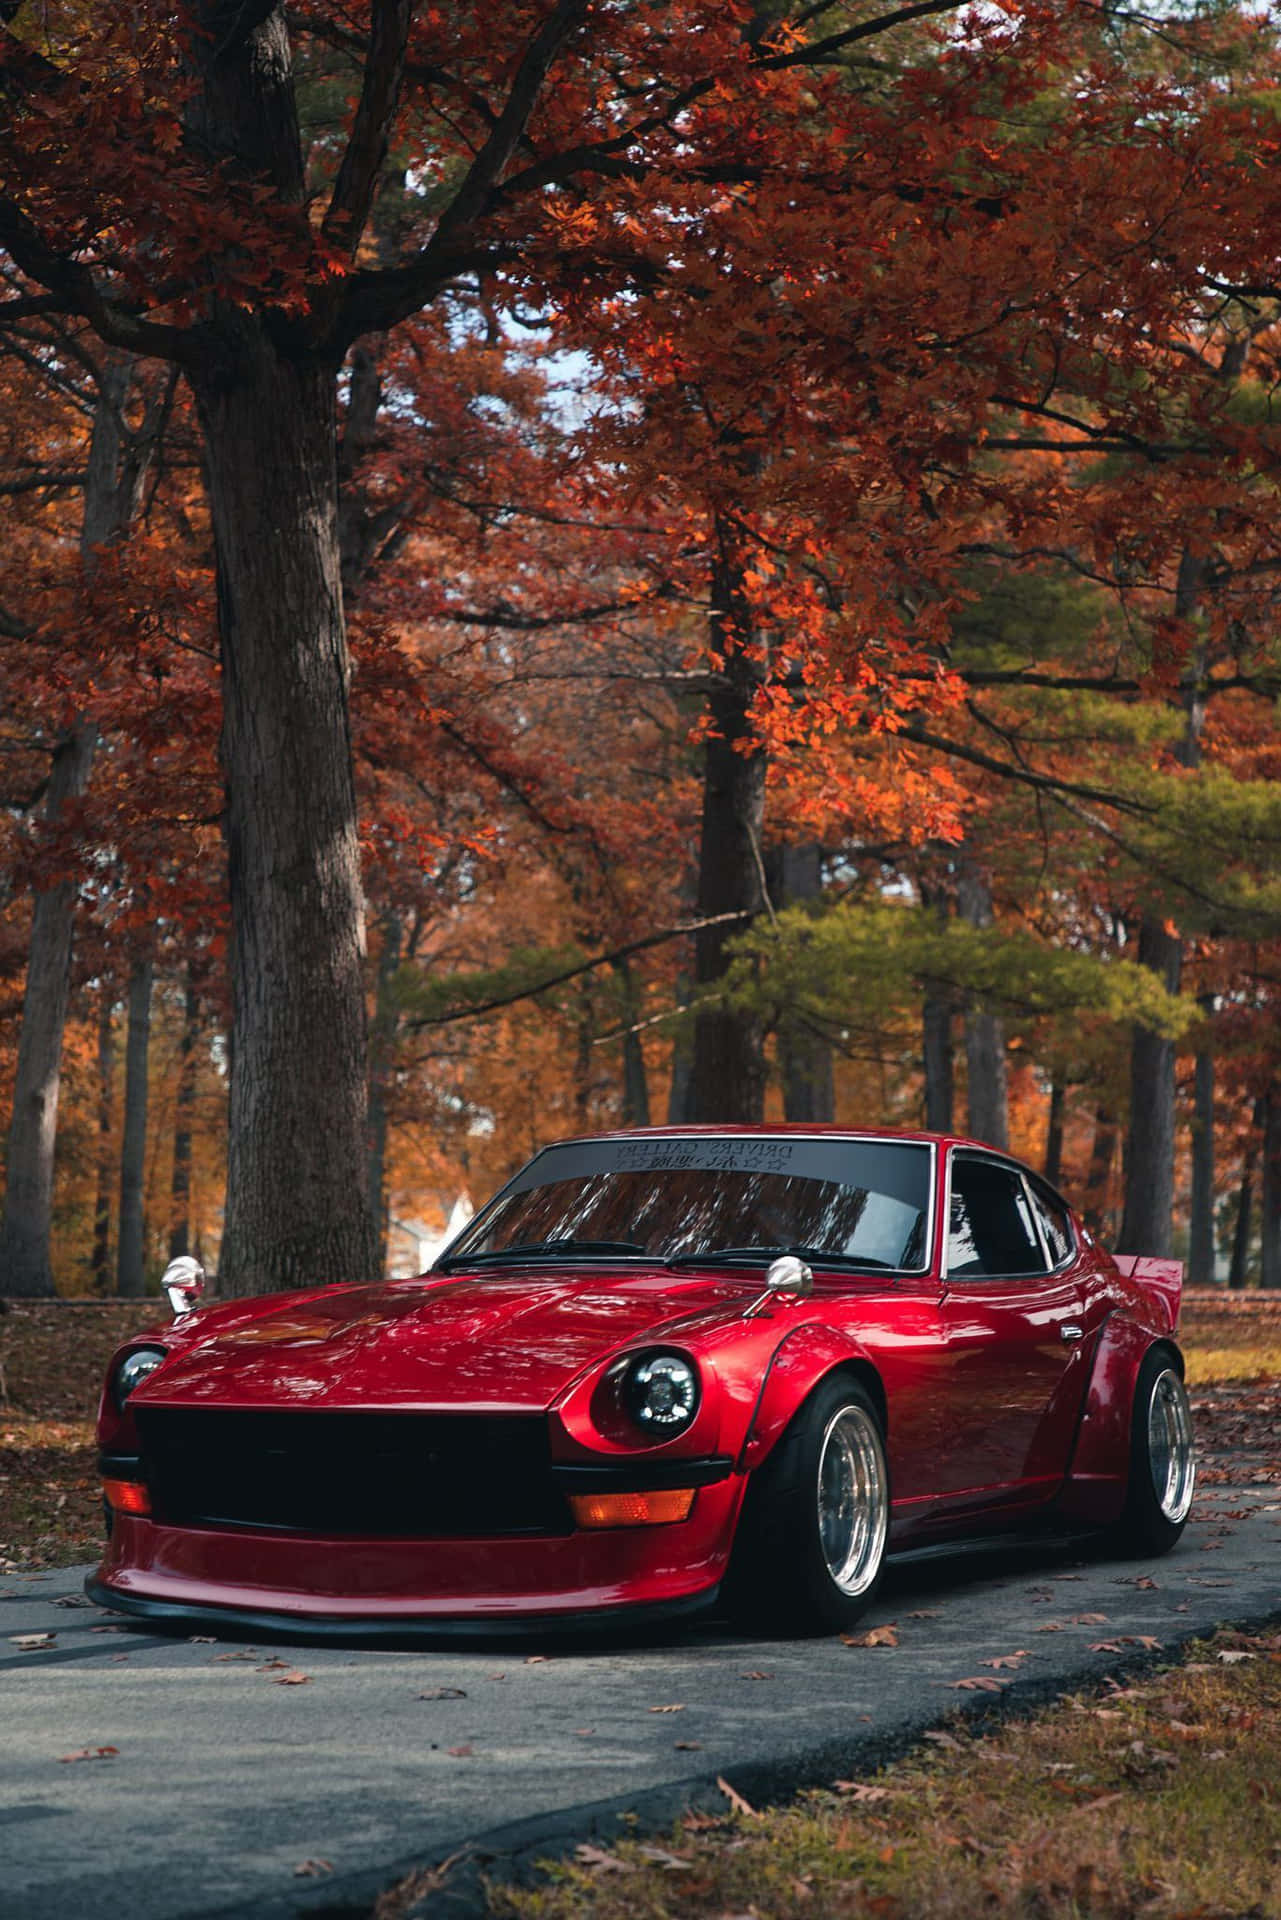 Sleek Red Datsun Classic On A Sunny Day